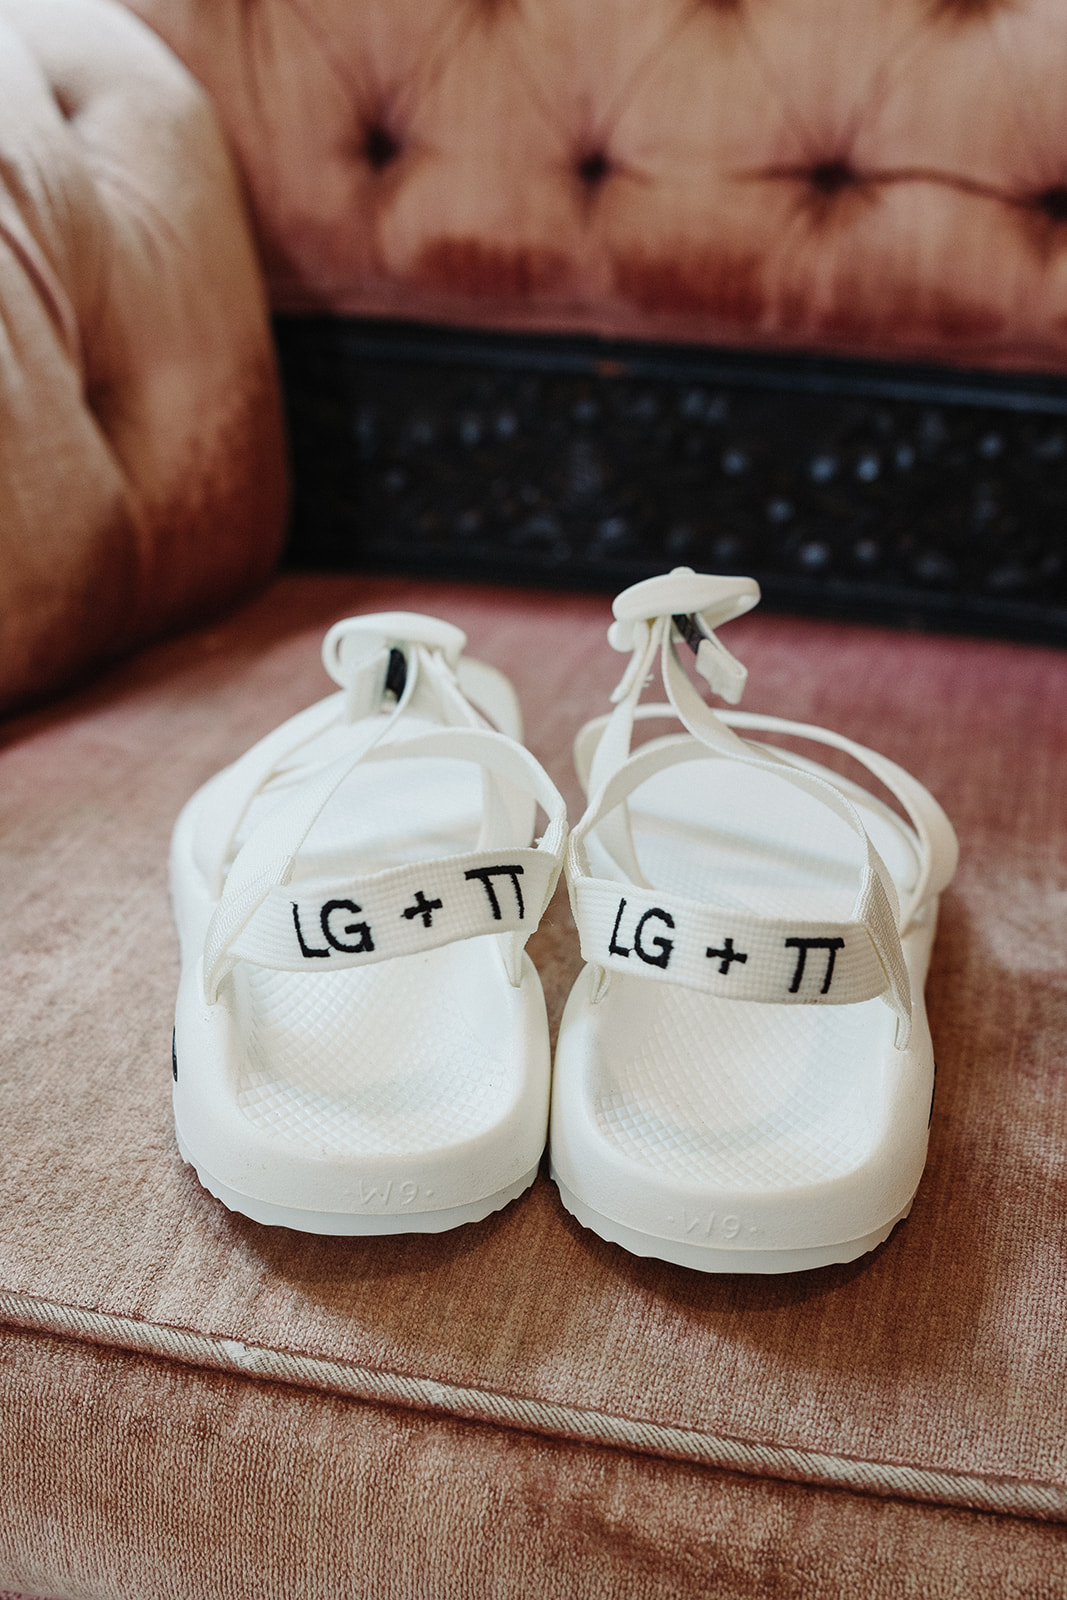 The bride's custom white Chaco sandals with her and her fiance's initials embroidered onto the back strap.